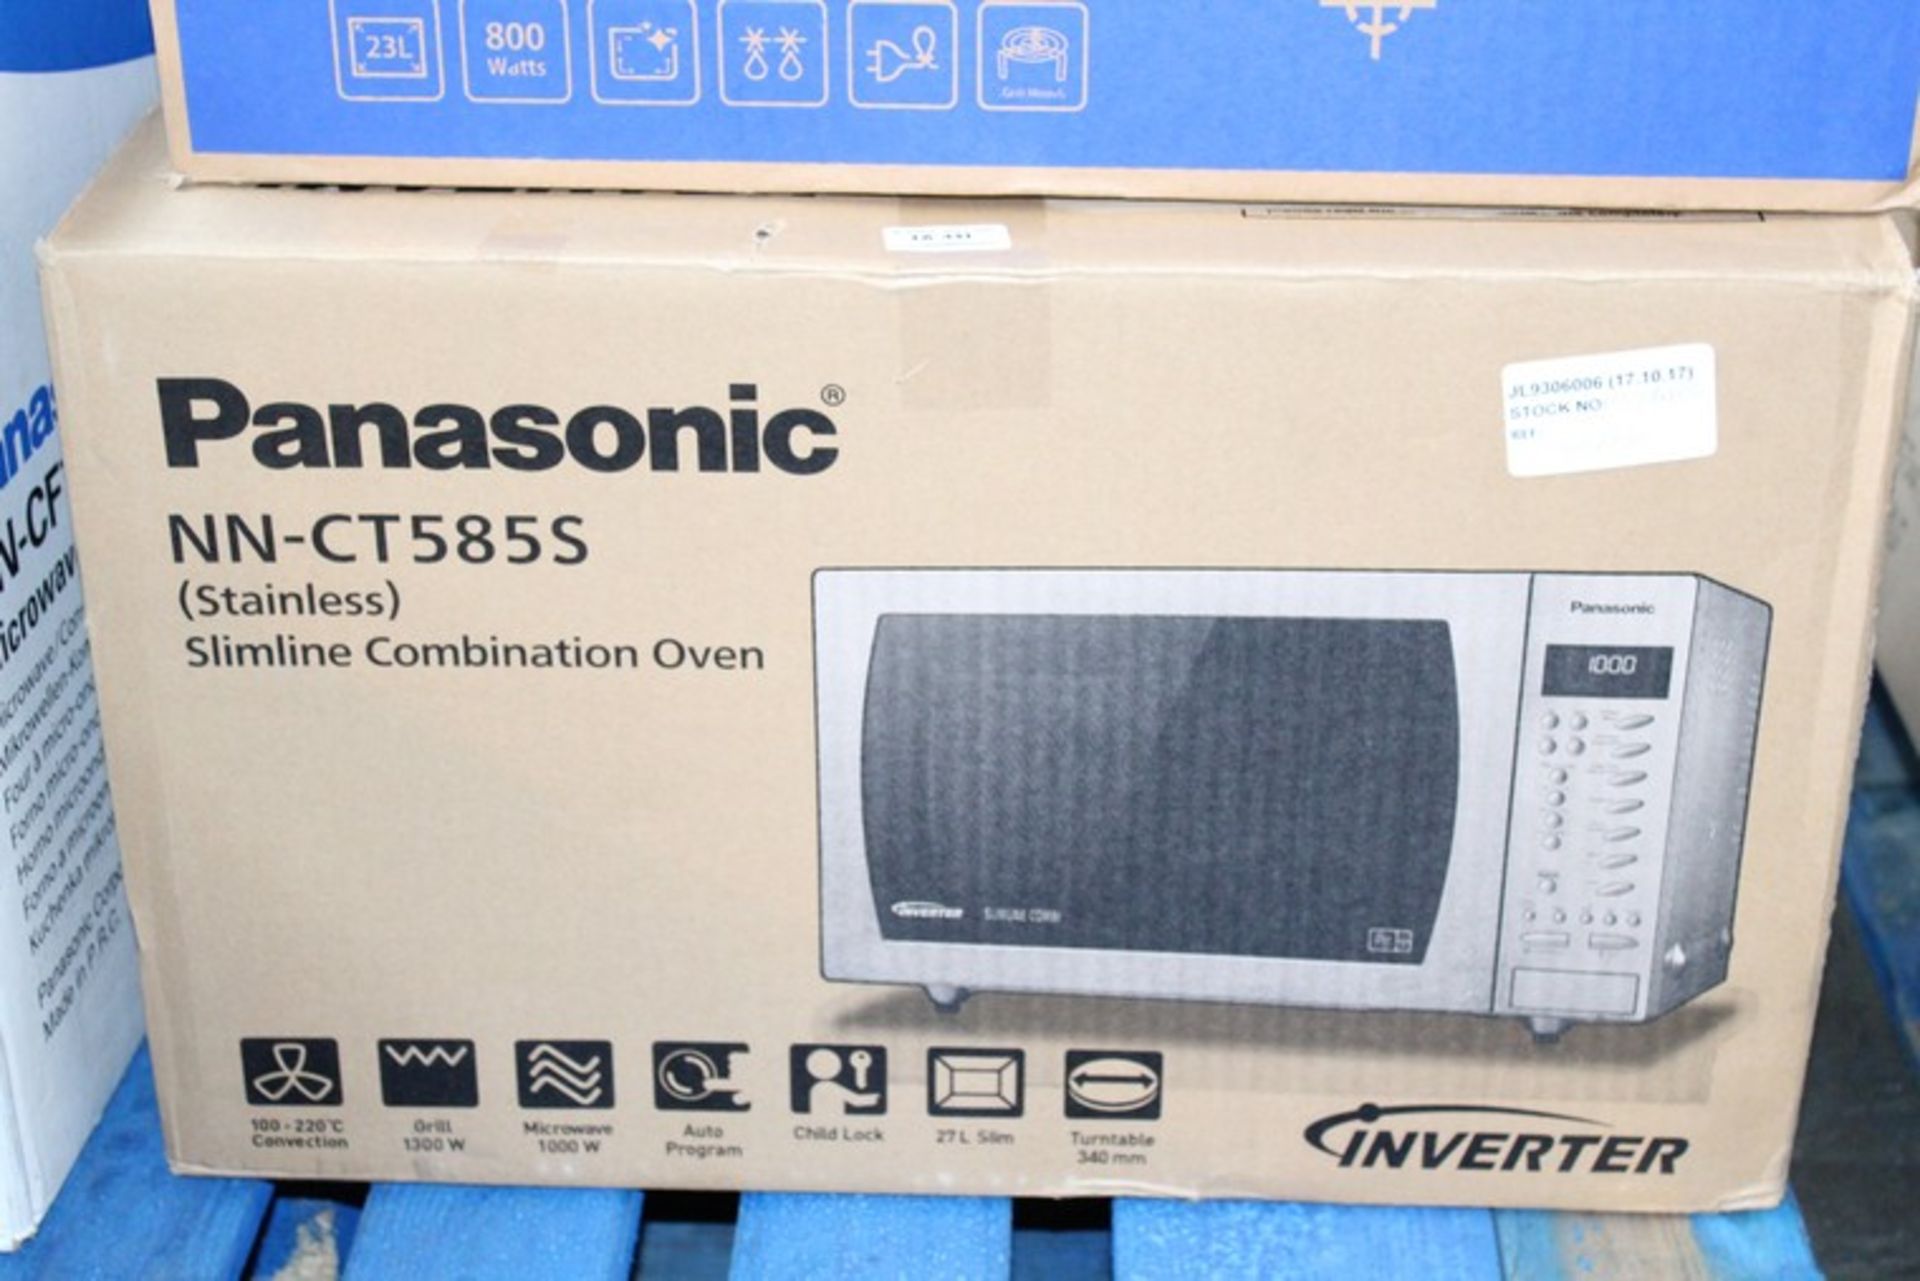 1 x BOXED SAMSUNG CERAMIC INSIDE MICROWAVE OVEN RRP £80 (17.10.17) (33775513) *PLEASE NOTE THAT